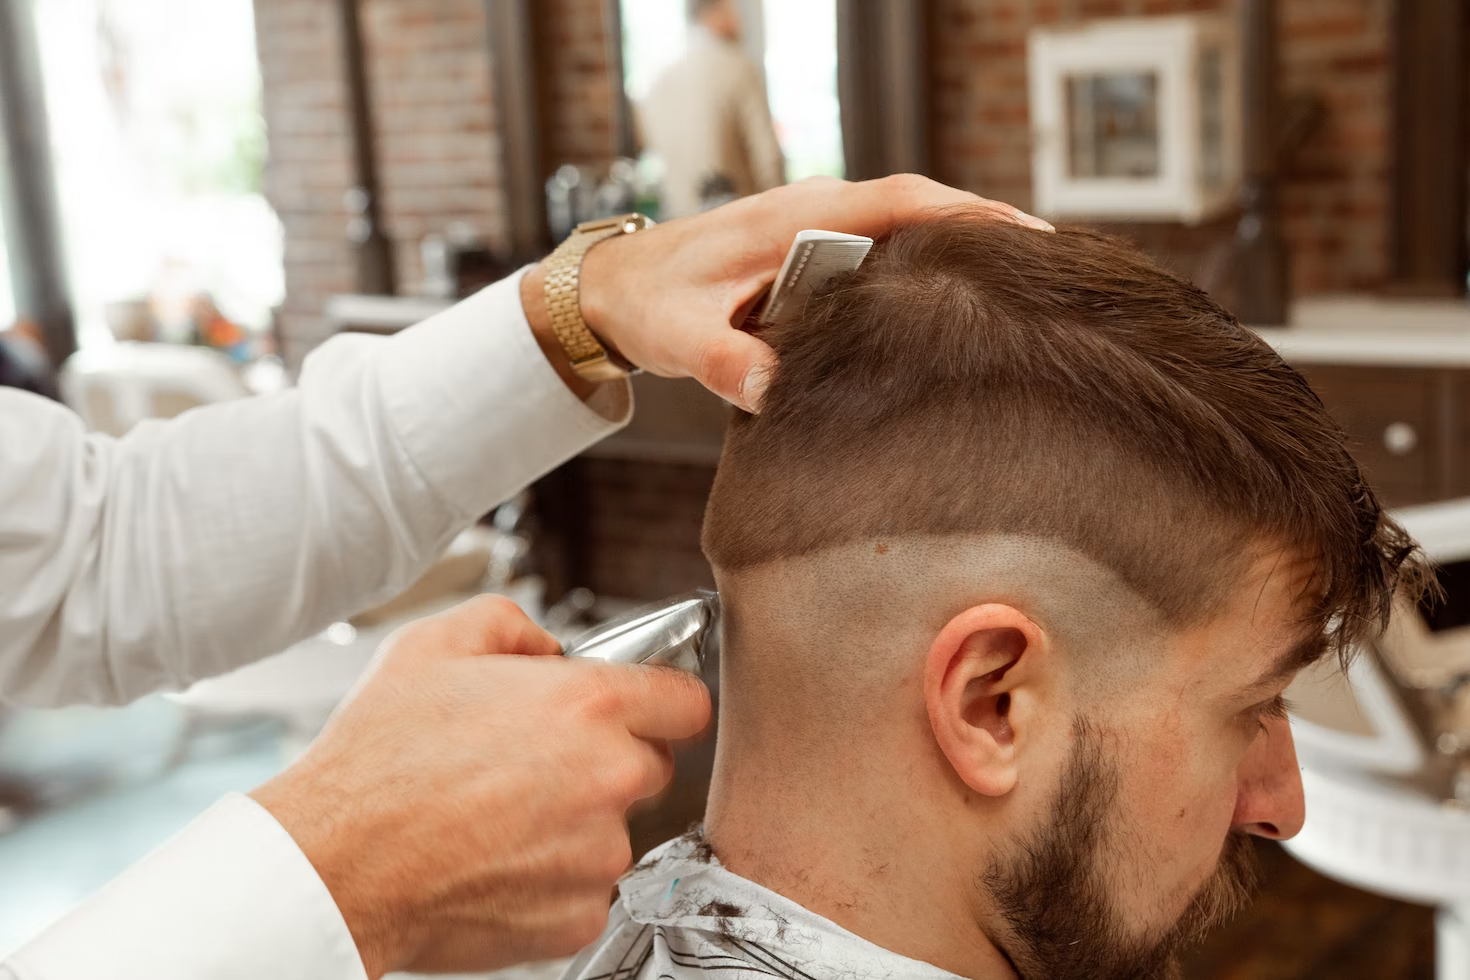 Popular Haircut Styles for Men In Charlotte - Bishops Can Do the Job